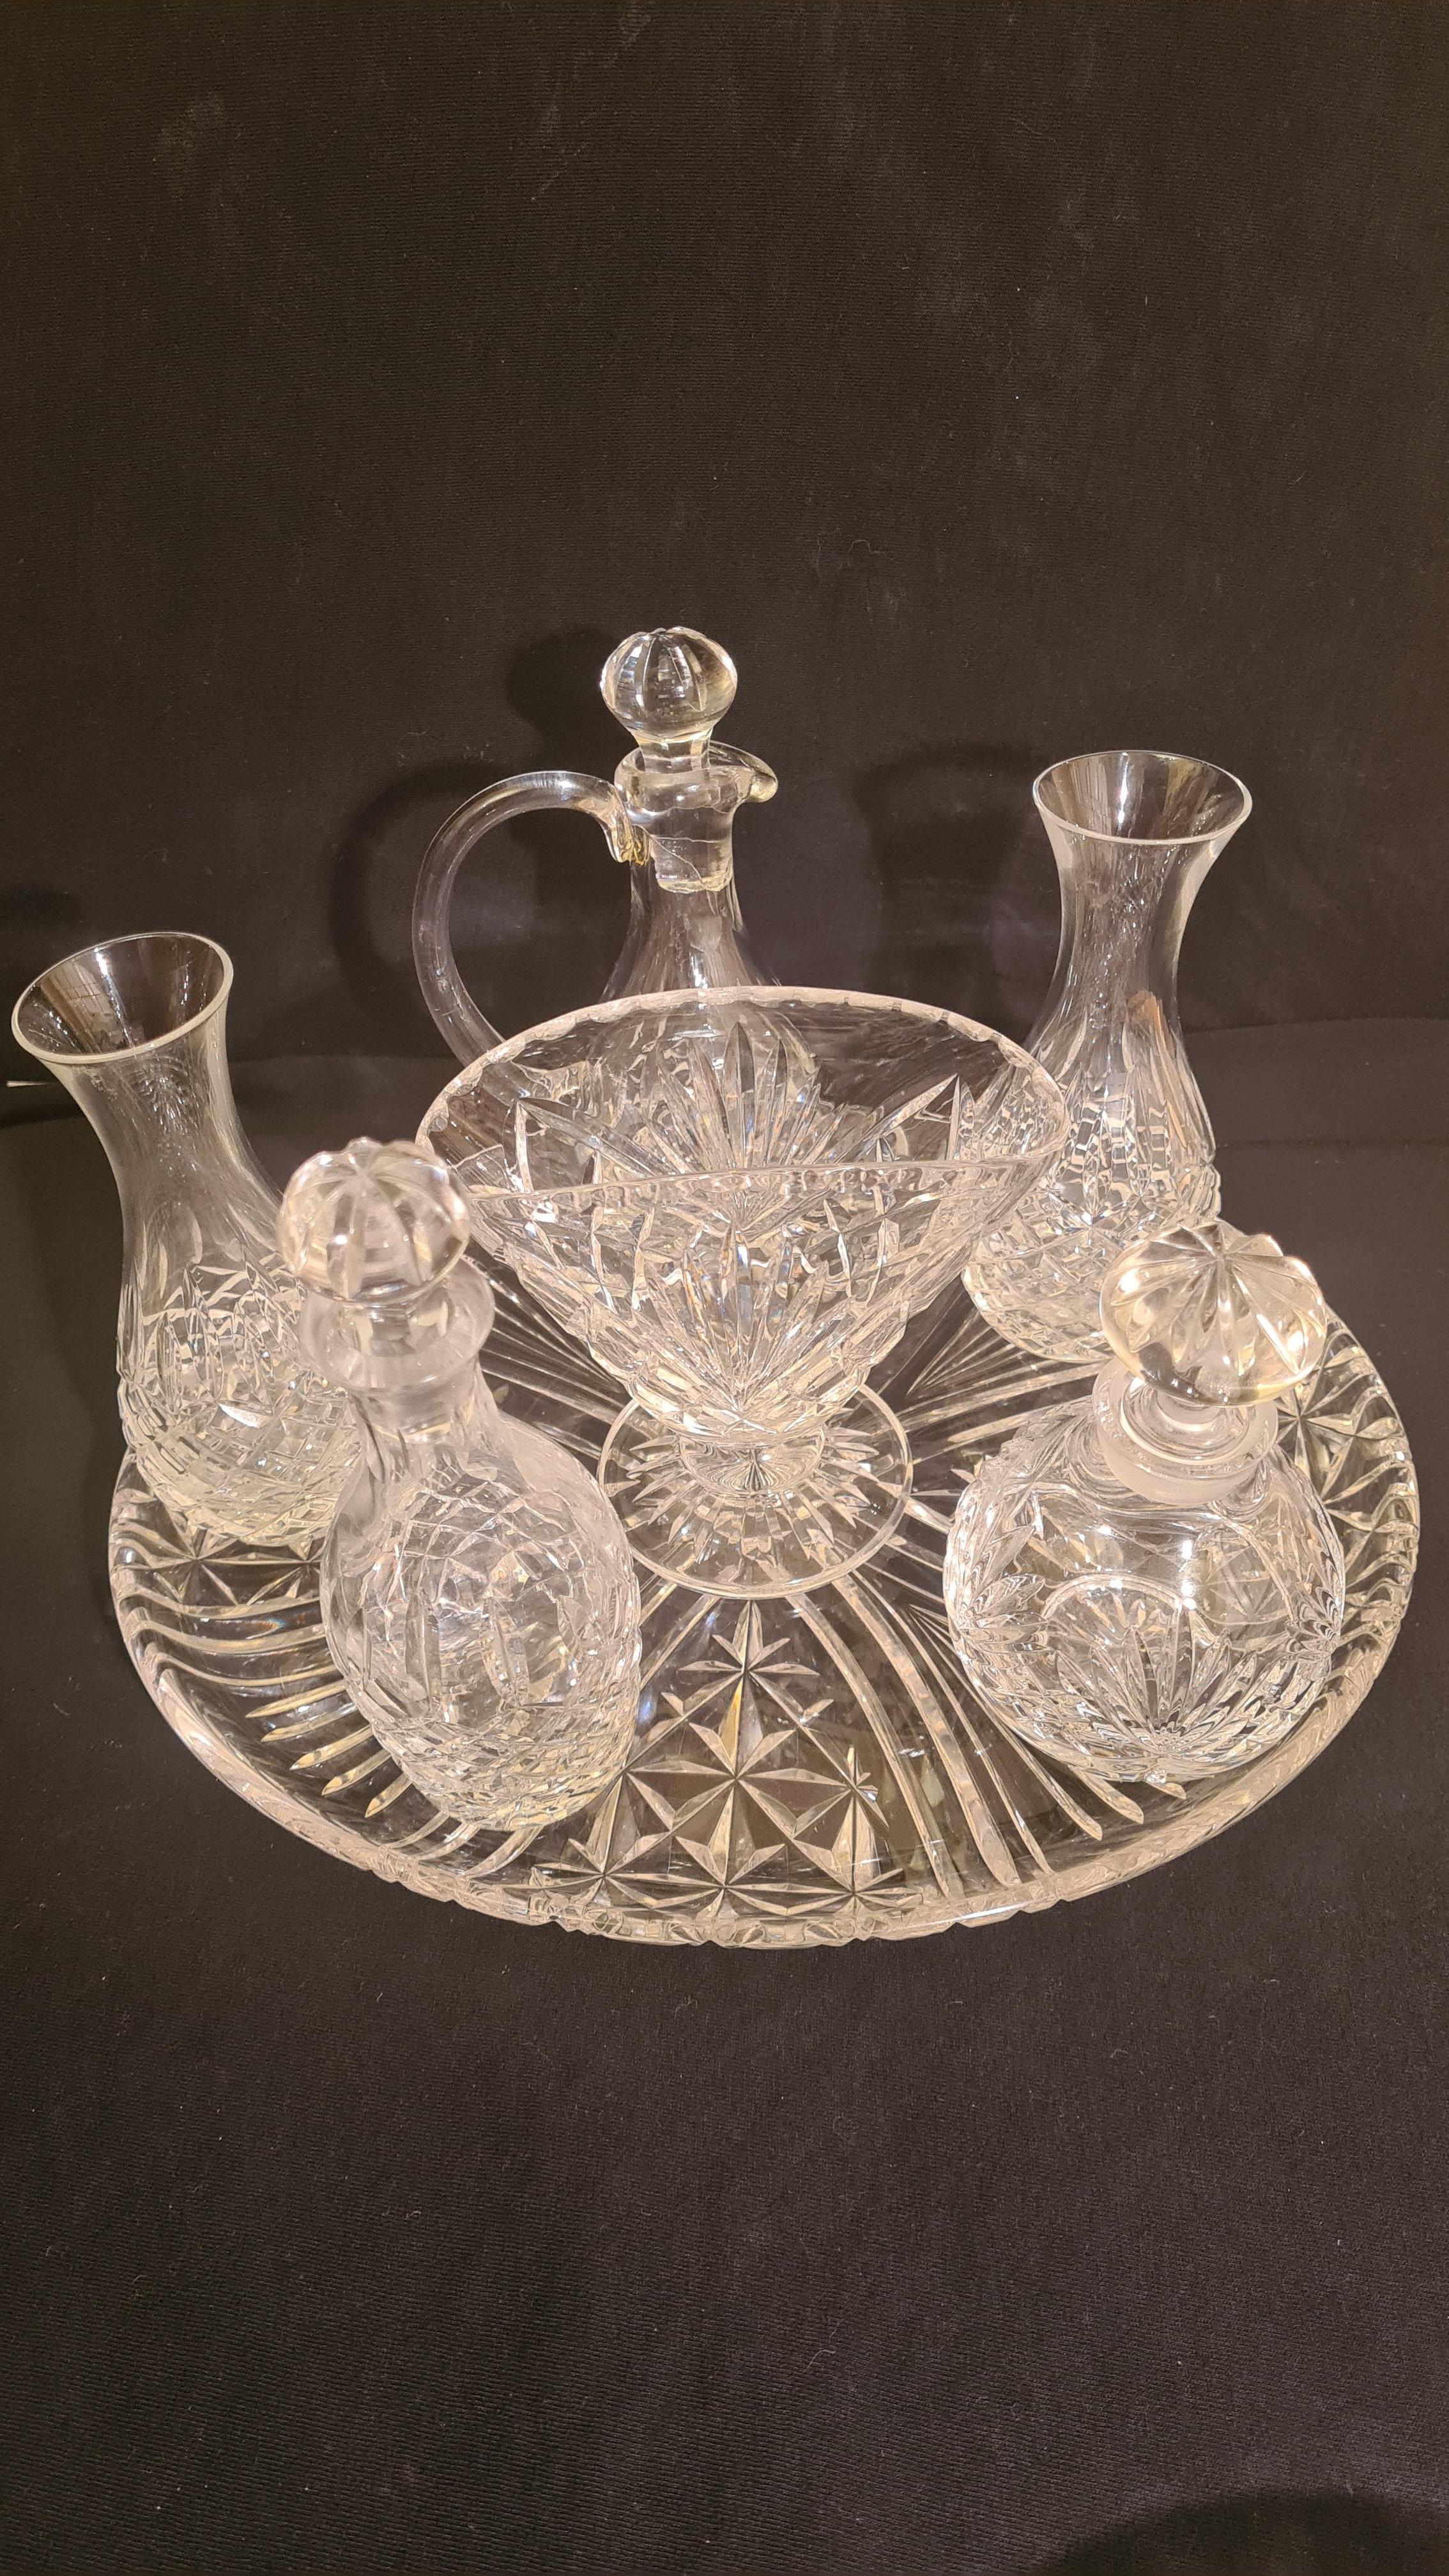 Beautiful vintage Stuart crystal table set, 9 pieces,Stuart acid stamp, 1 plate 27 cm width, two bowls to 17 cm and 10 cm width, two vases 14 cm tall, two decanters for (oil and vinegar) 15 cm tall, one perfume bottle 12 cm tall and napkin holder 12